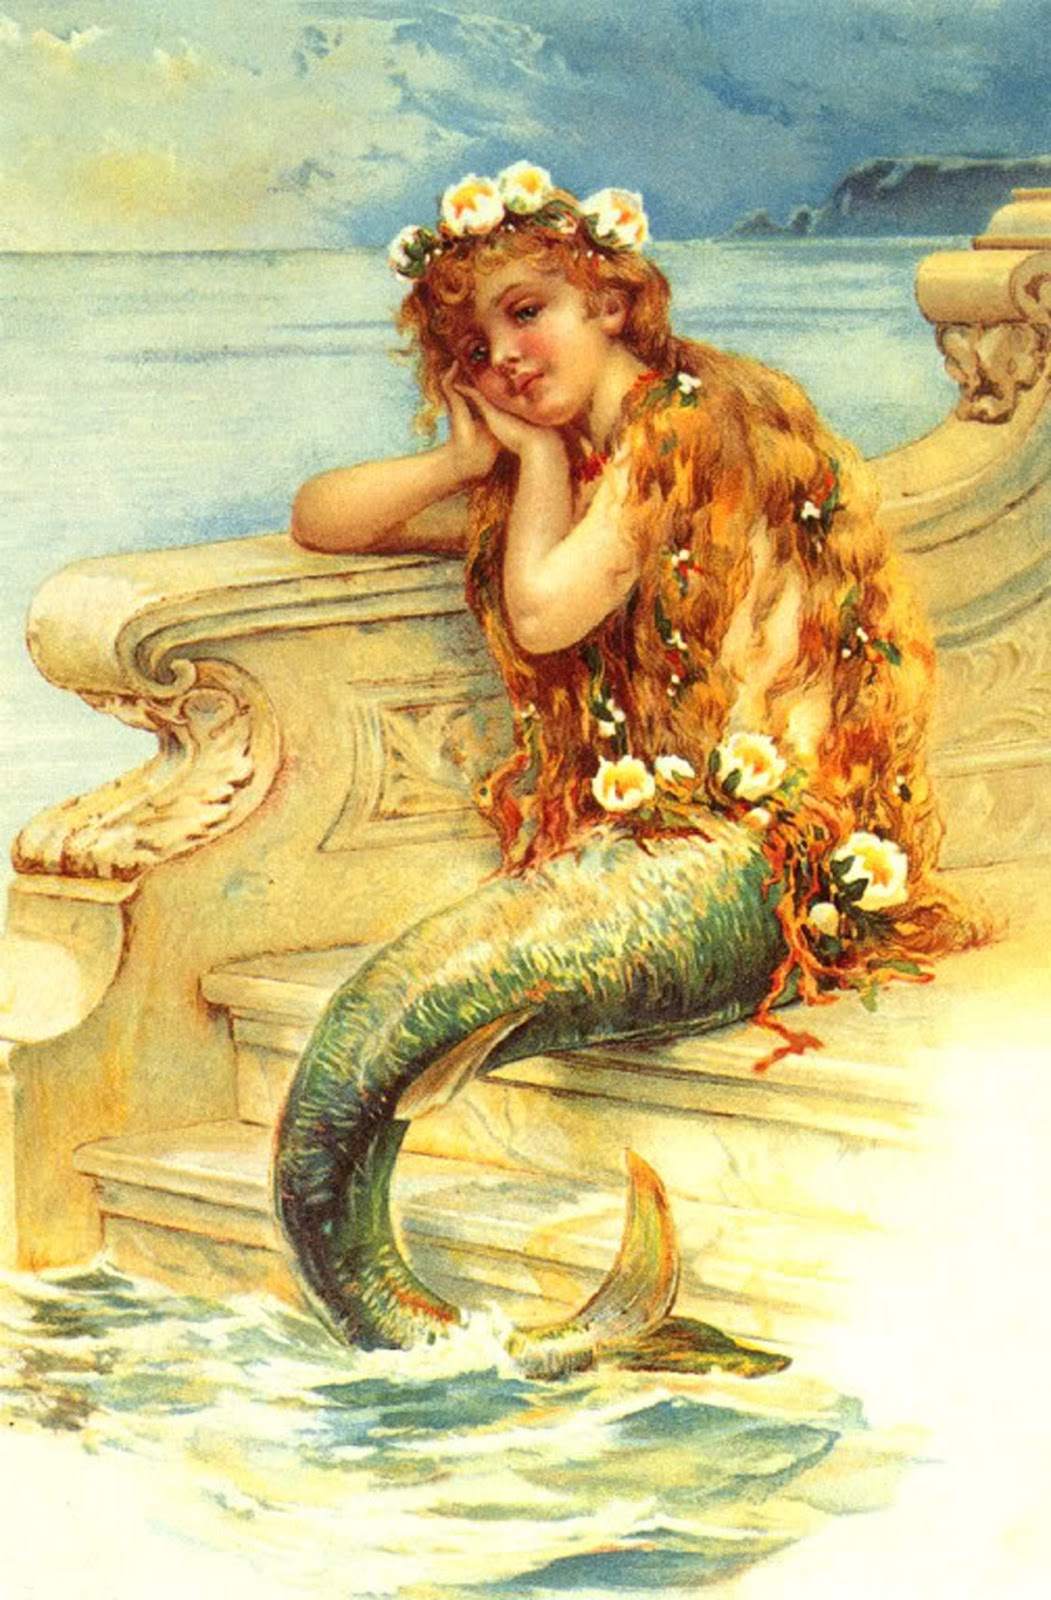 Vintage Mermaid Illustration Image Pictures Becuo